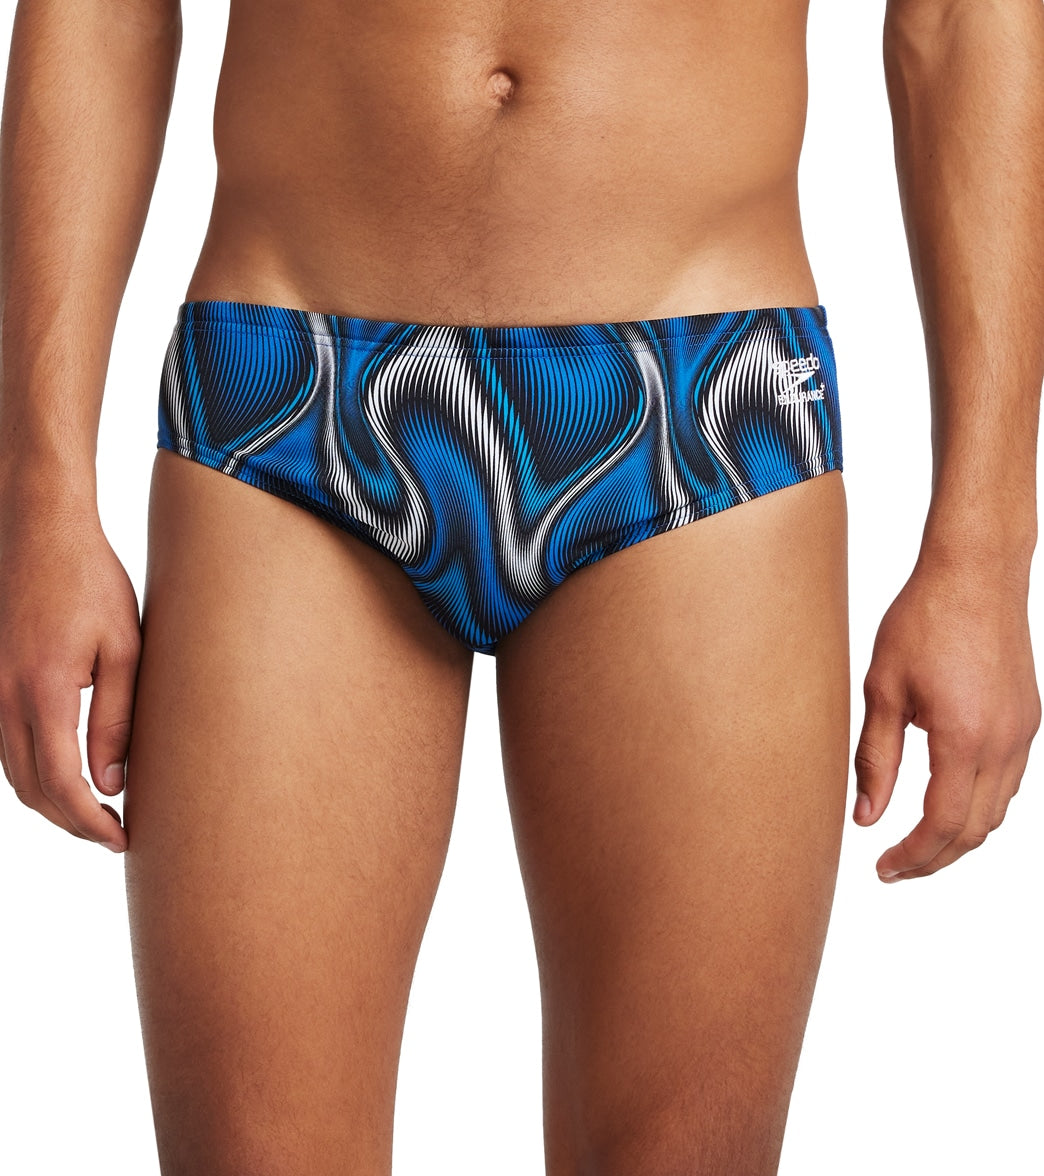 A pair of men's swim briefs by Speedo. The swimwear features a distinctive blue and black wavy pattern and a sleek, form-fitting design.